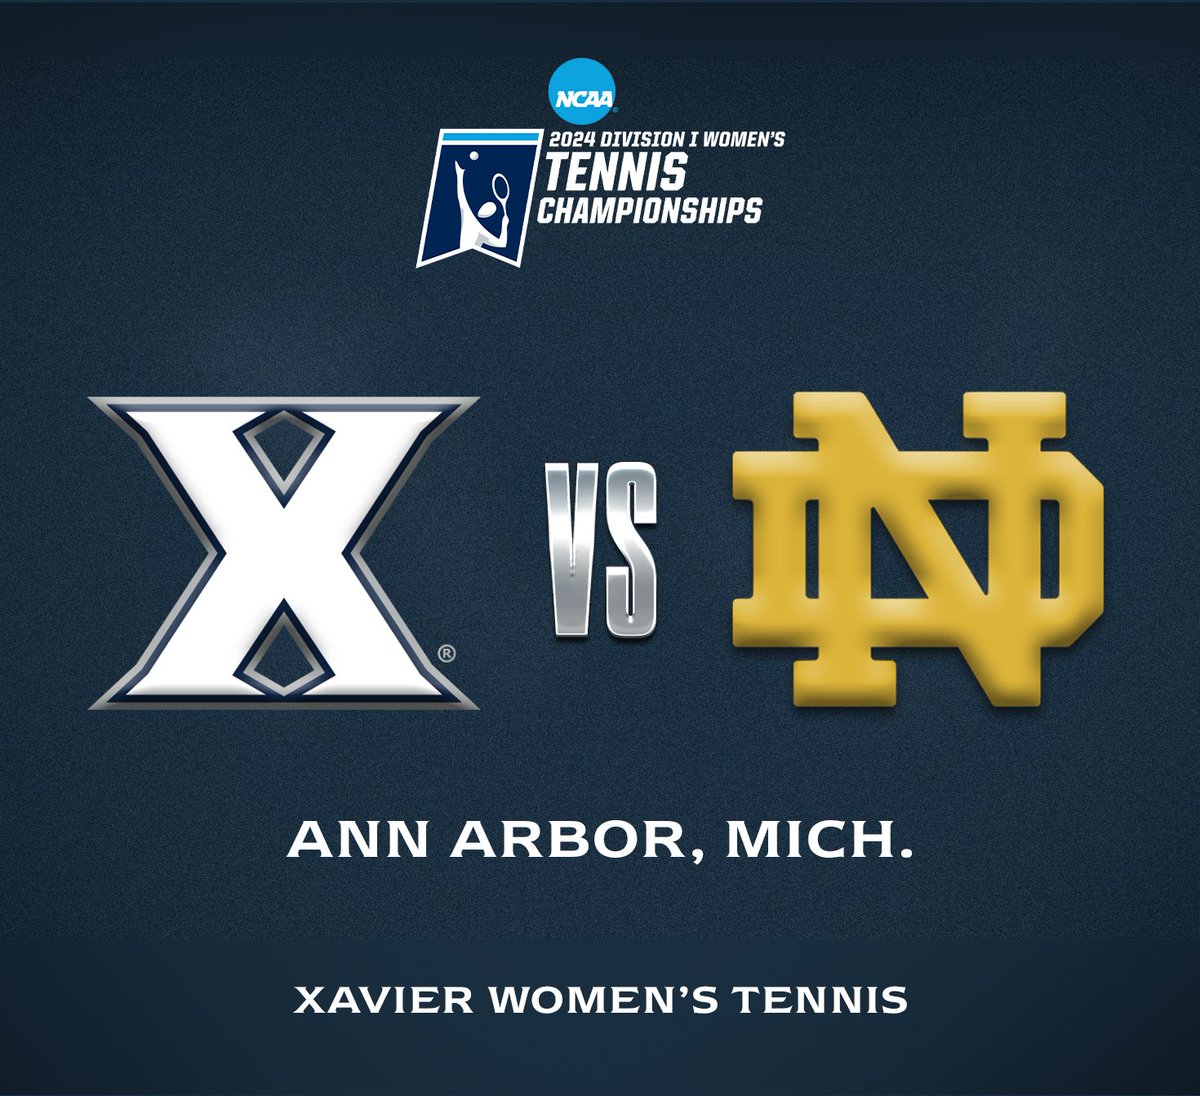 The Musketeers will face Notre Dame in the first round of the NCAA Championships in Ann Arbor, Mich., hosted by No. 3 national seed Michigan!